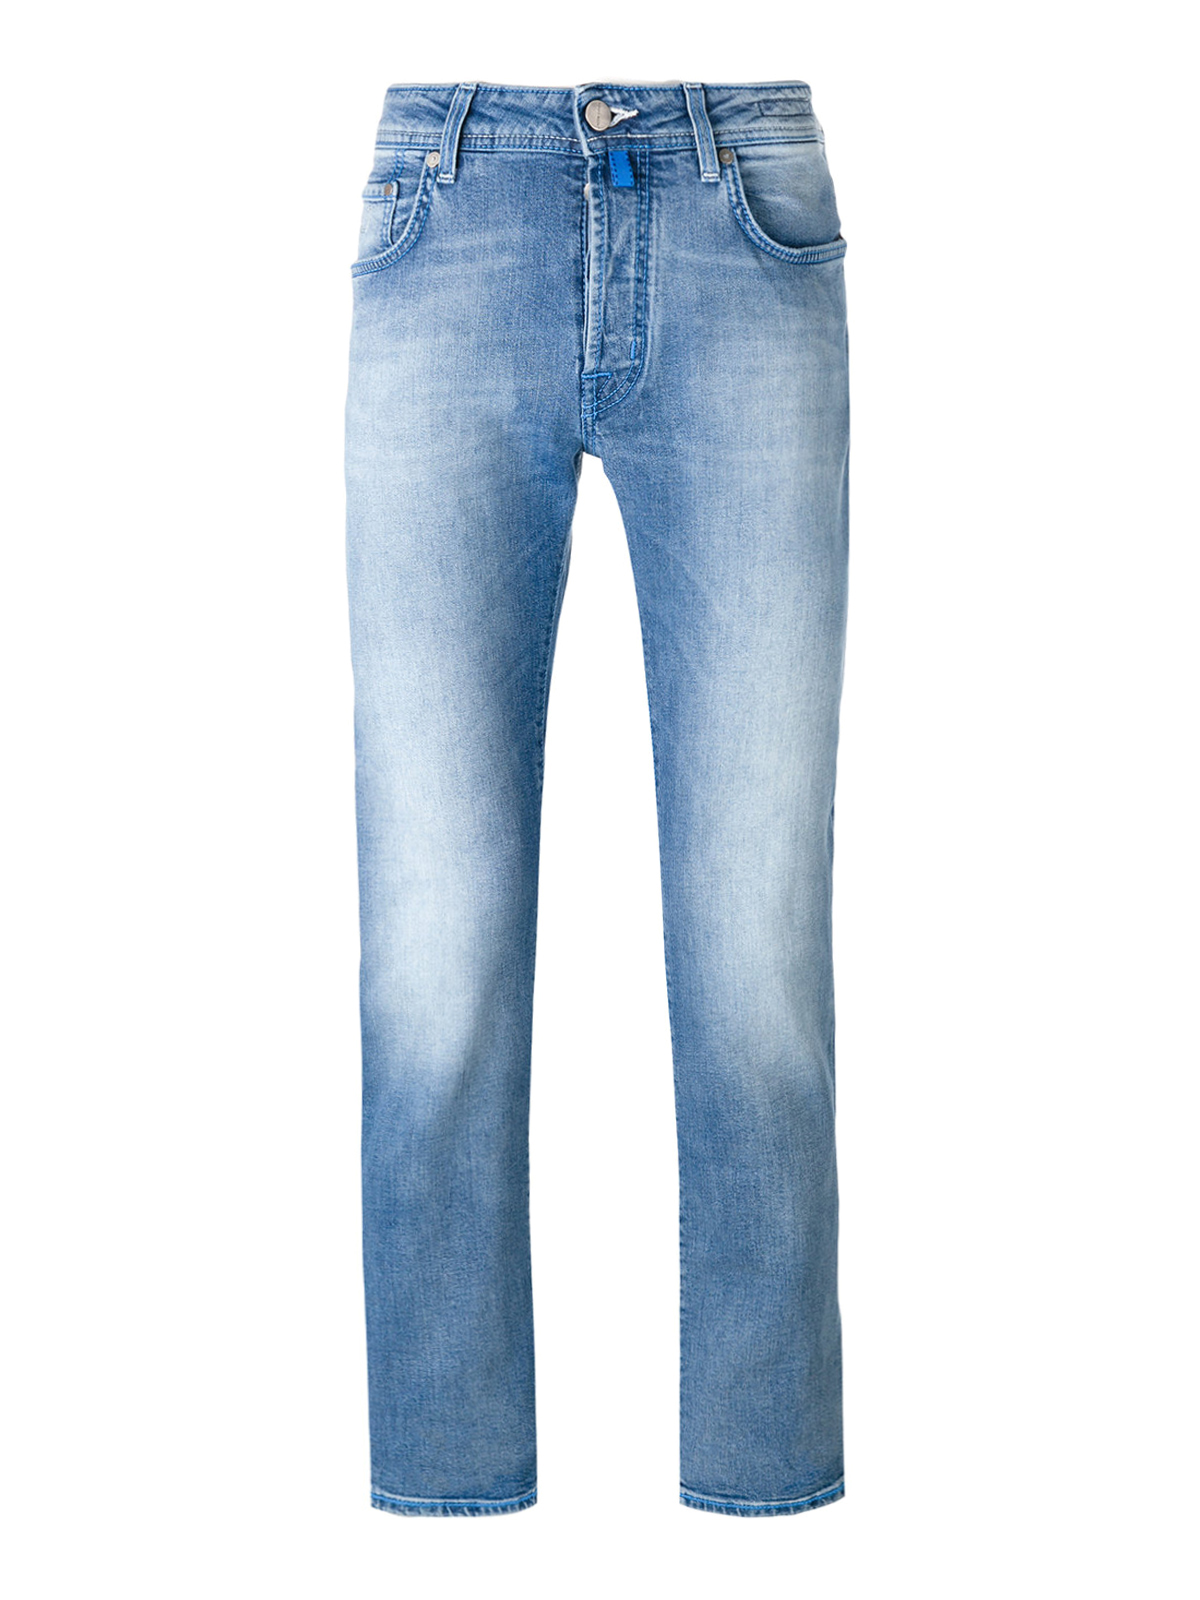 Straight leg jeans Jacob Cohen - Faded denim tailored jeans - PW688516003